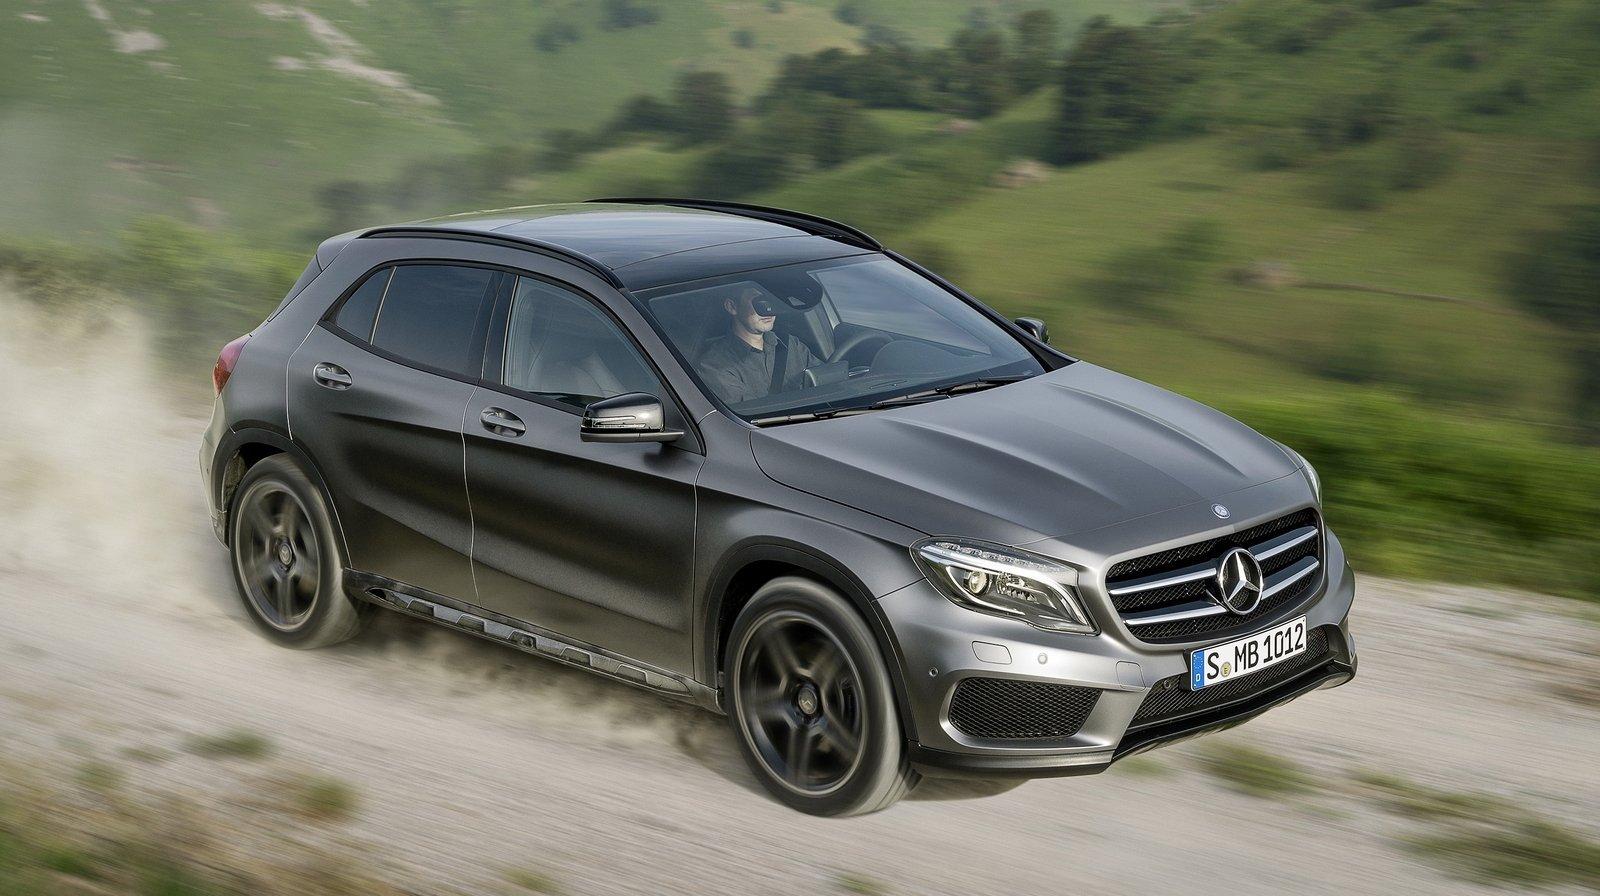 Mercedes Benz GLA Class Picture, Photo, Wallpaper And Videos